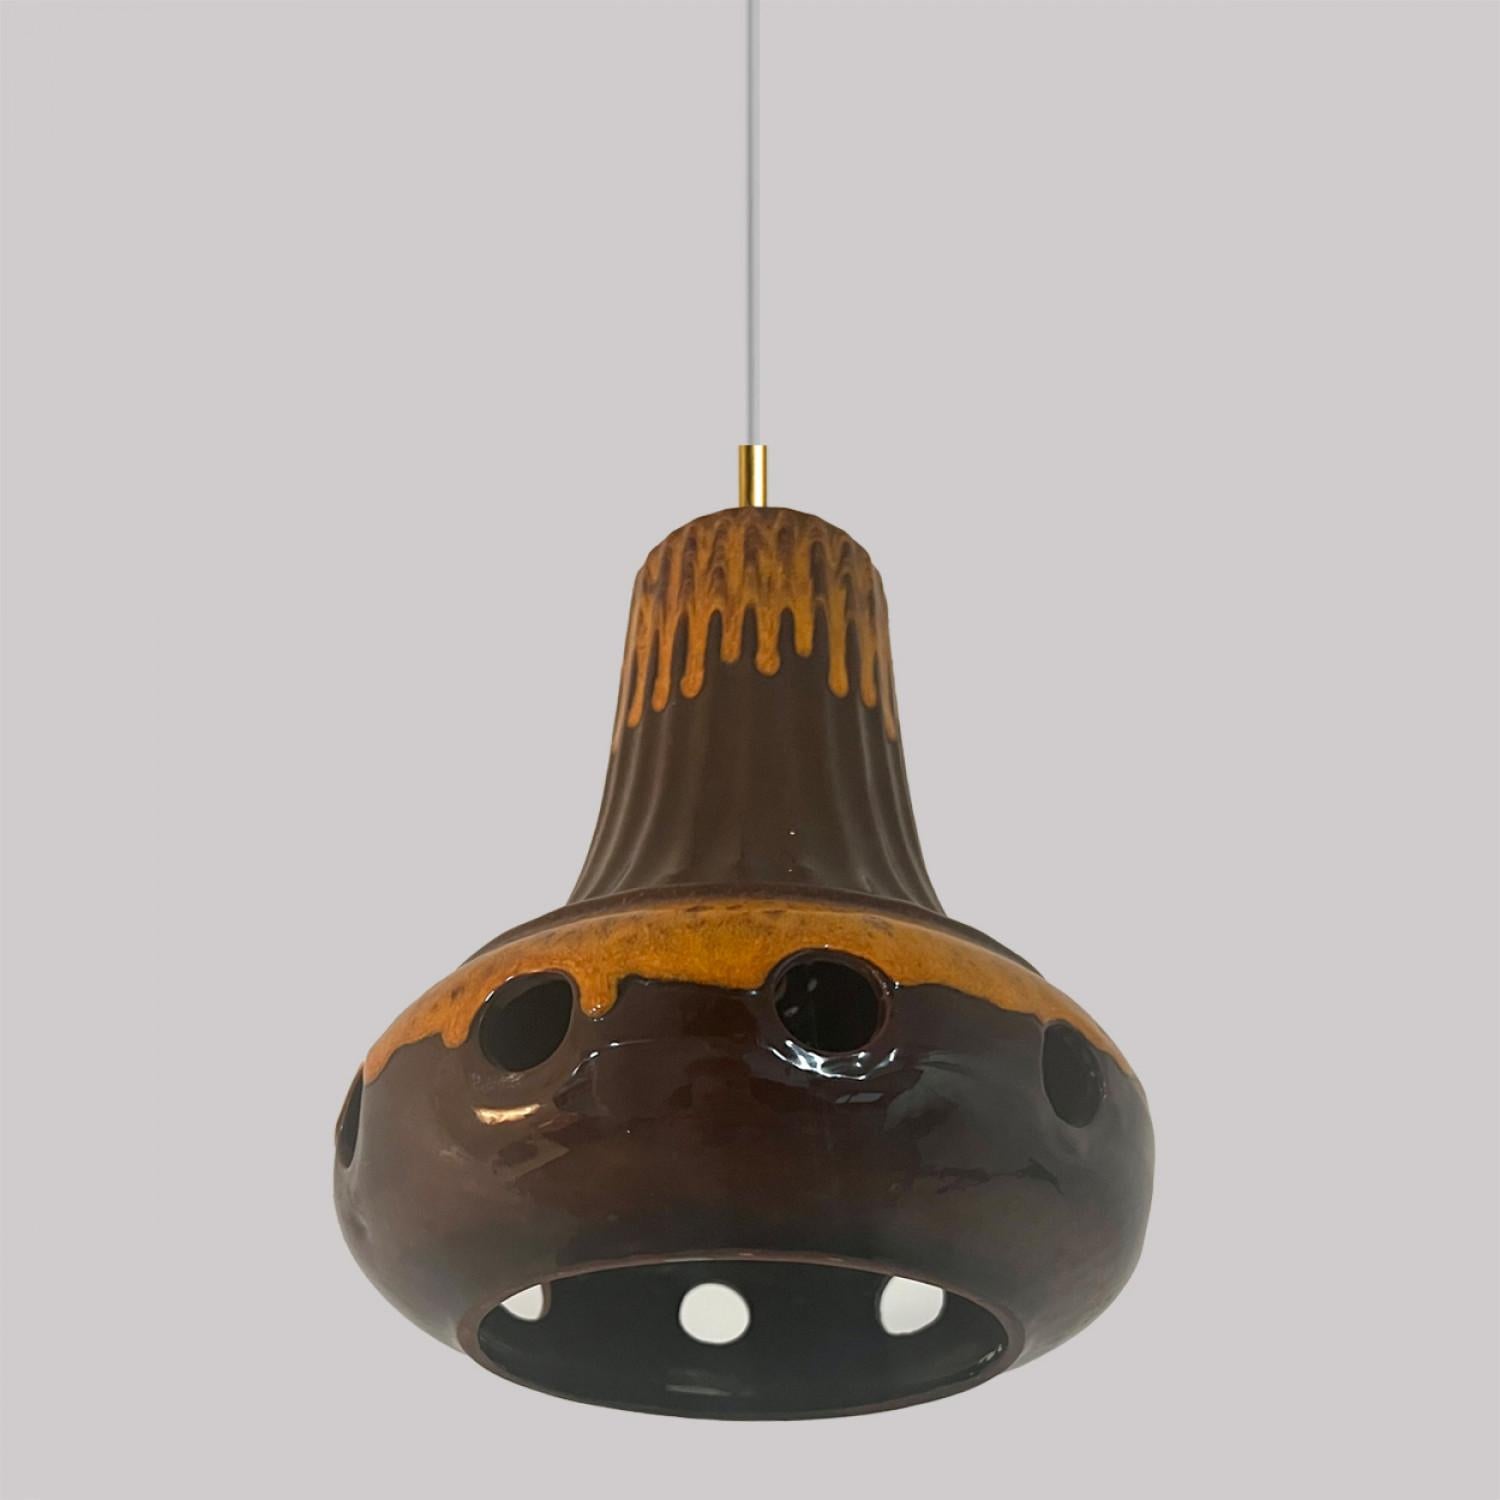 Set of Mixed Brown Glazed Ceramic Pendant Lights, Germany, 1970s For Sale 2